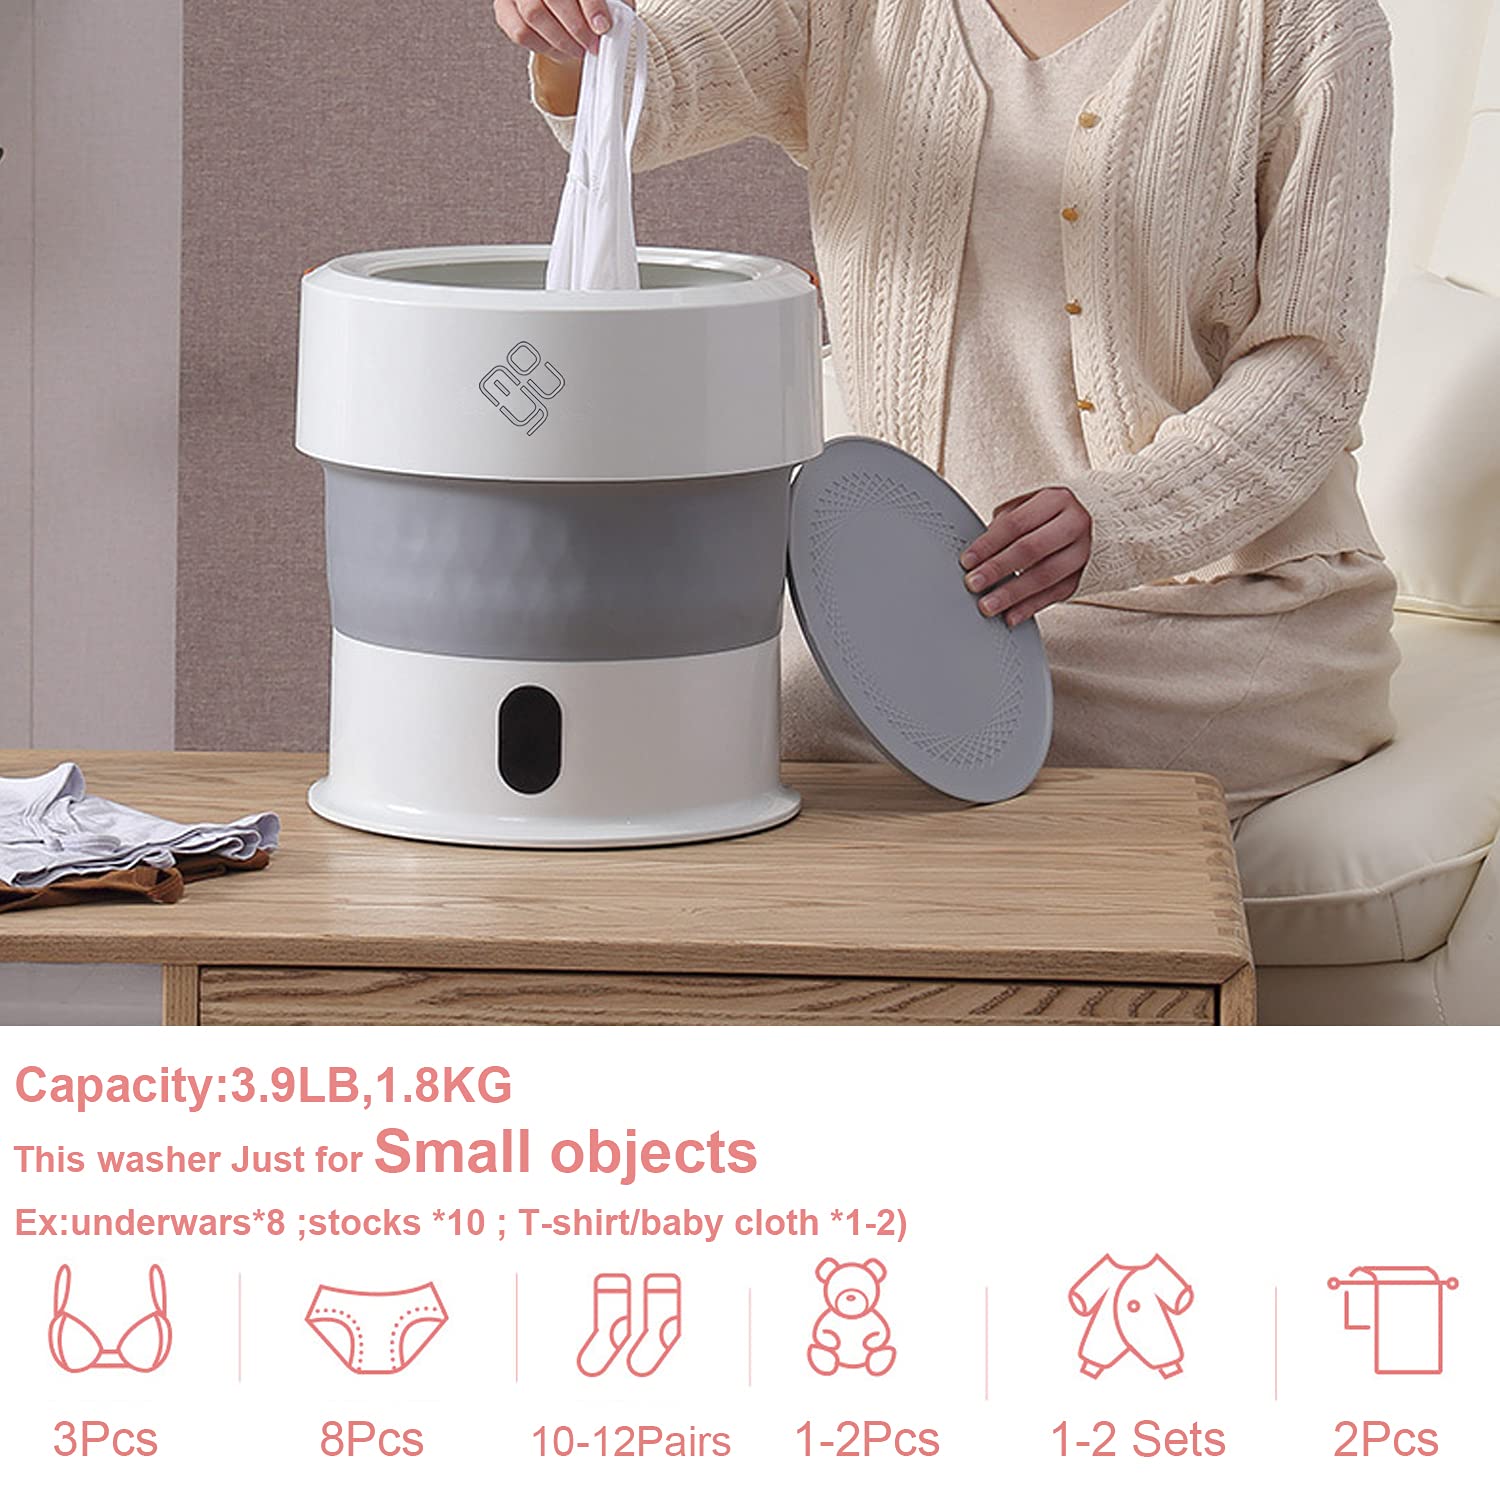 MOYU Portable Washing Machine For Small objects Such As Underwears Socks Baby Clothes, Folding Washer with 3.9LB/1.8KG Capacity (100V/240V) (White)